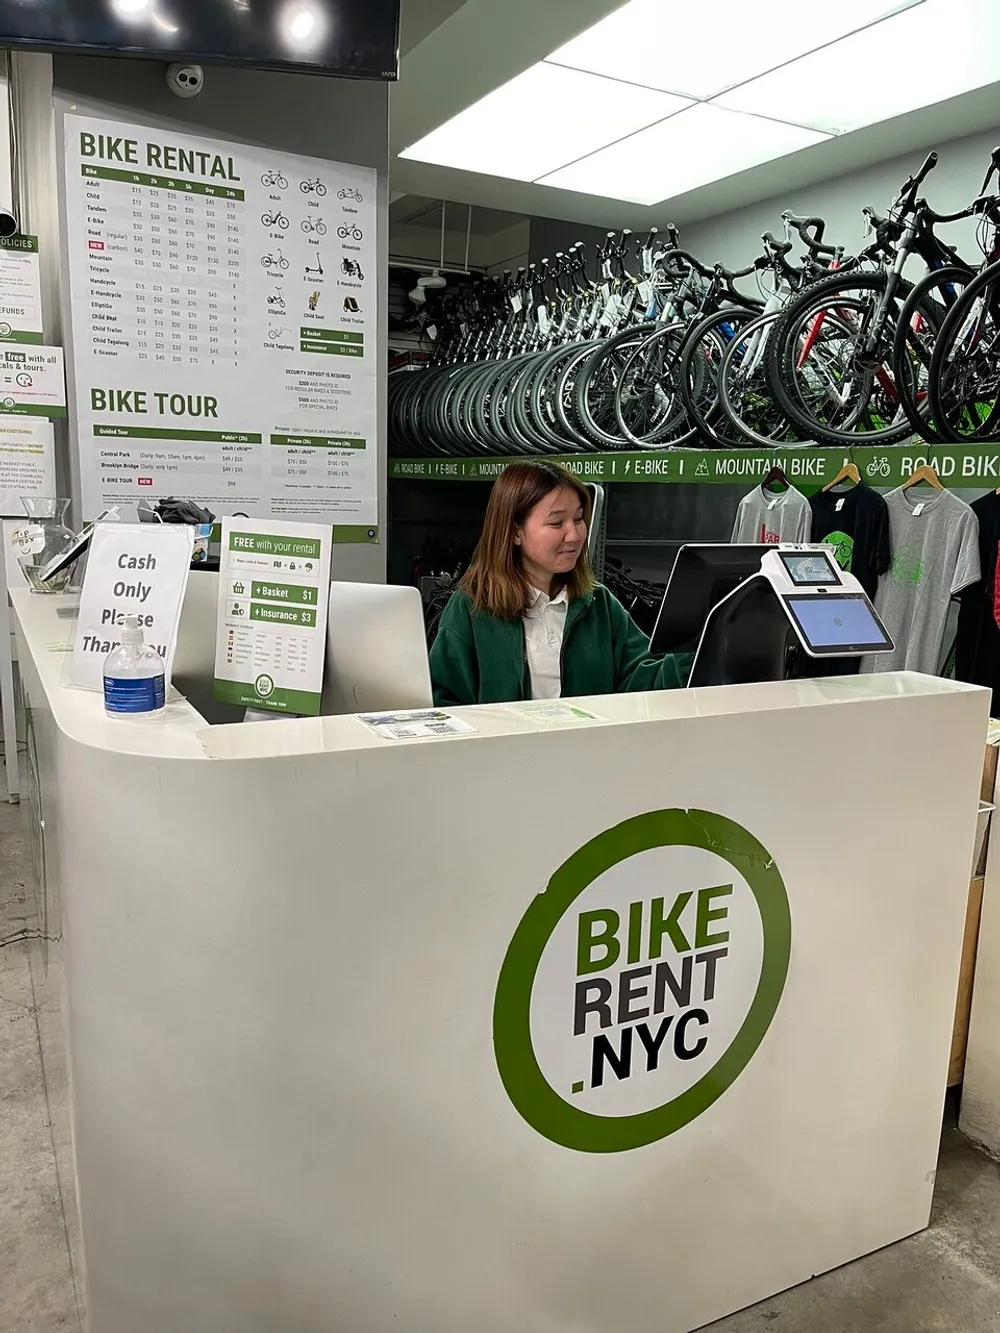 A person is seated behind the counter of a bike rental shop with information on bike rentals and tours visible in the background